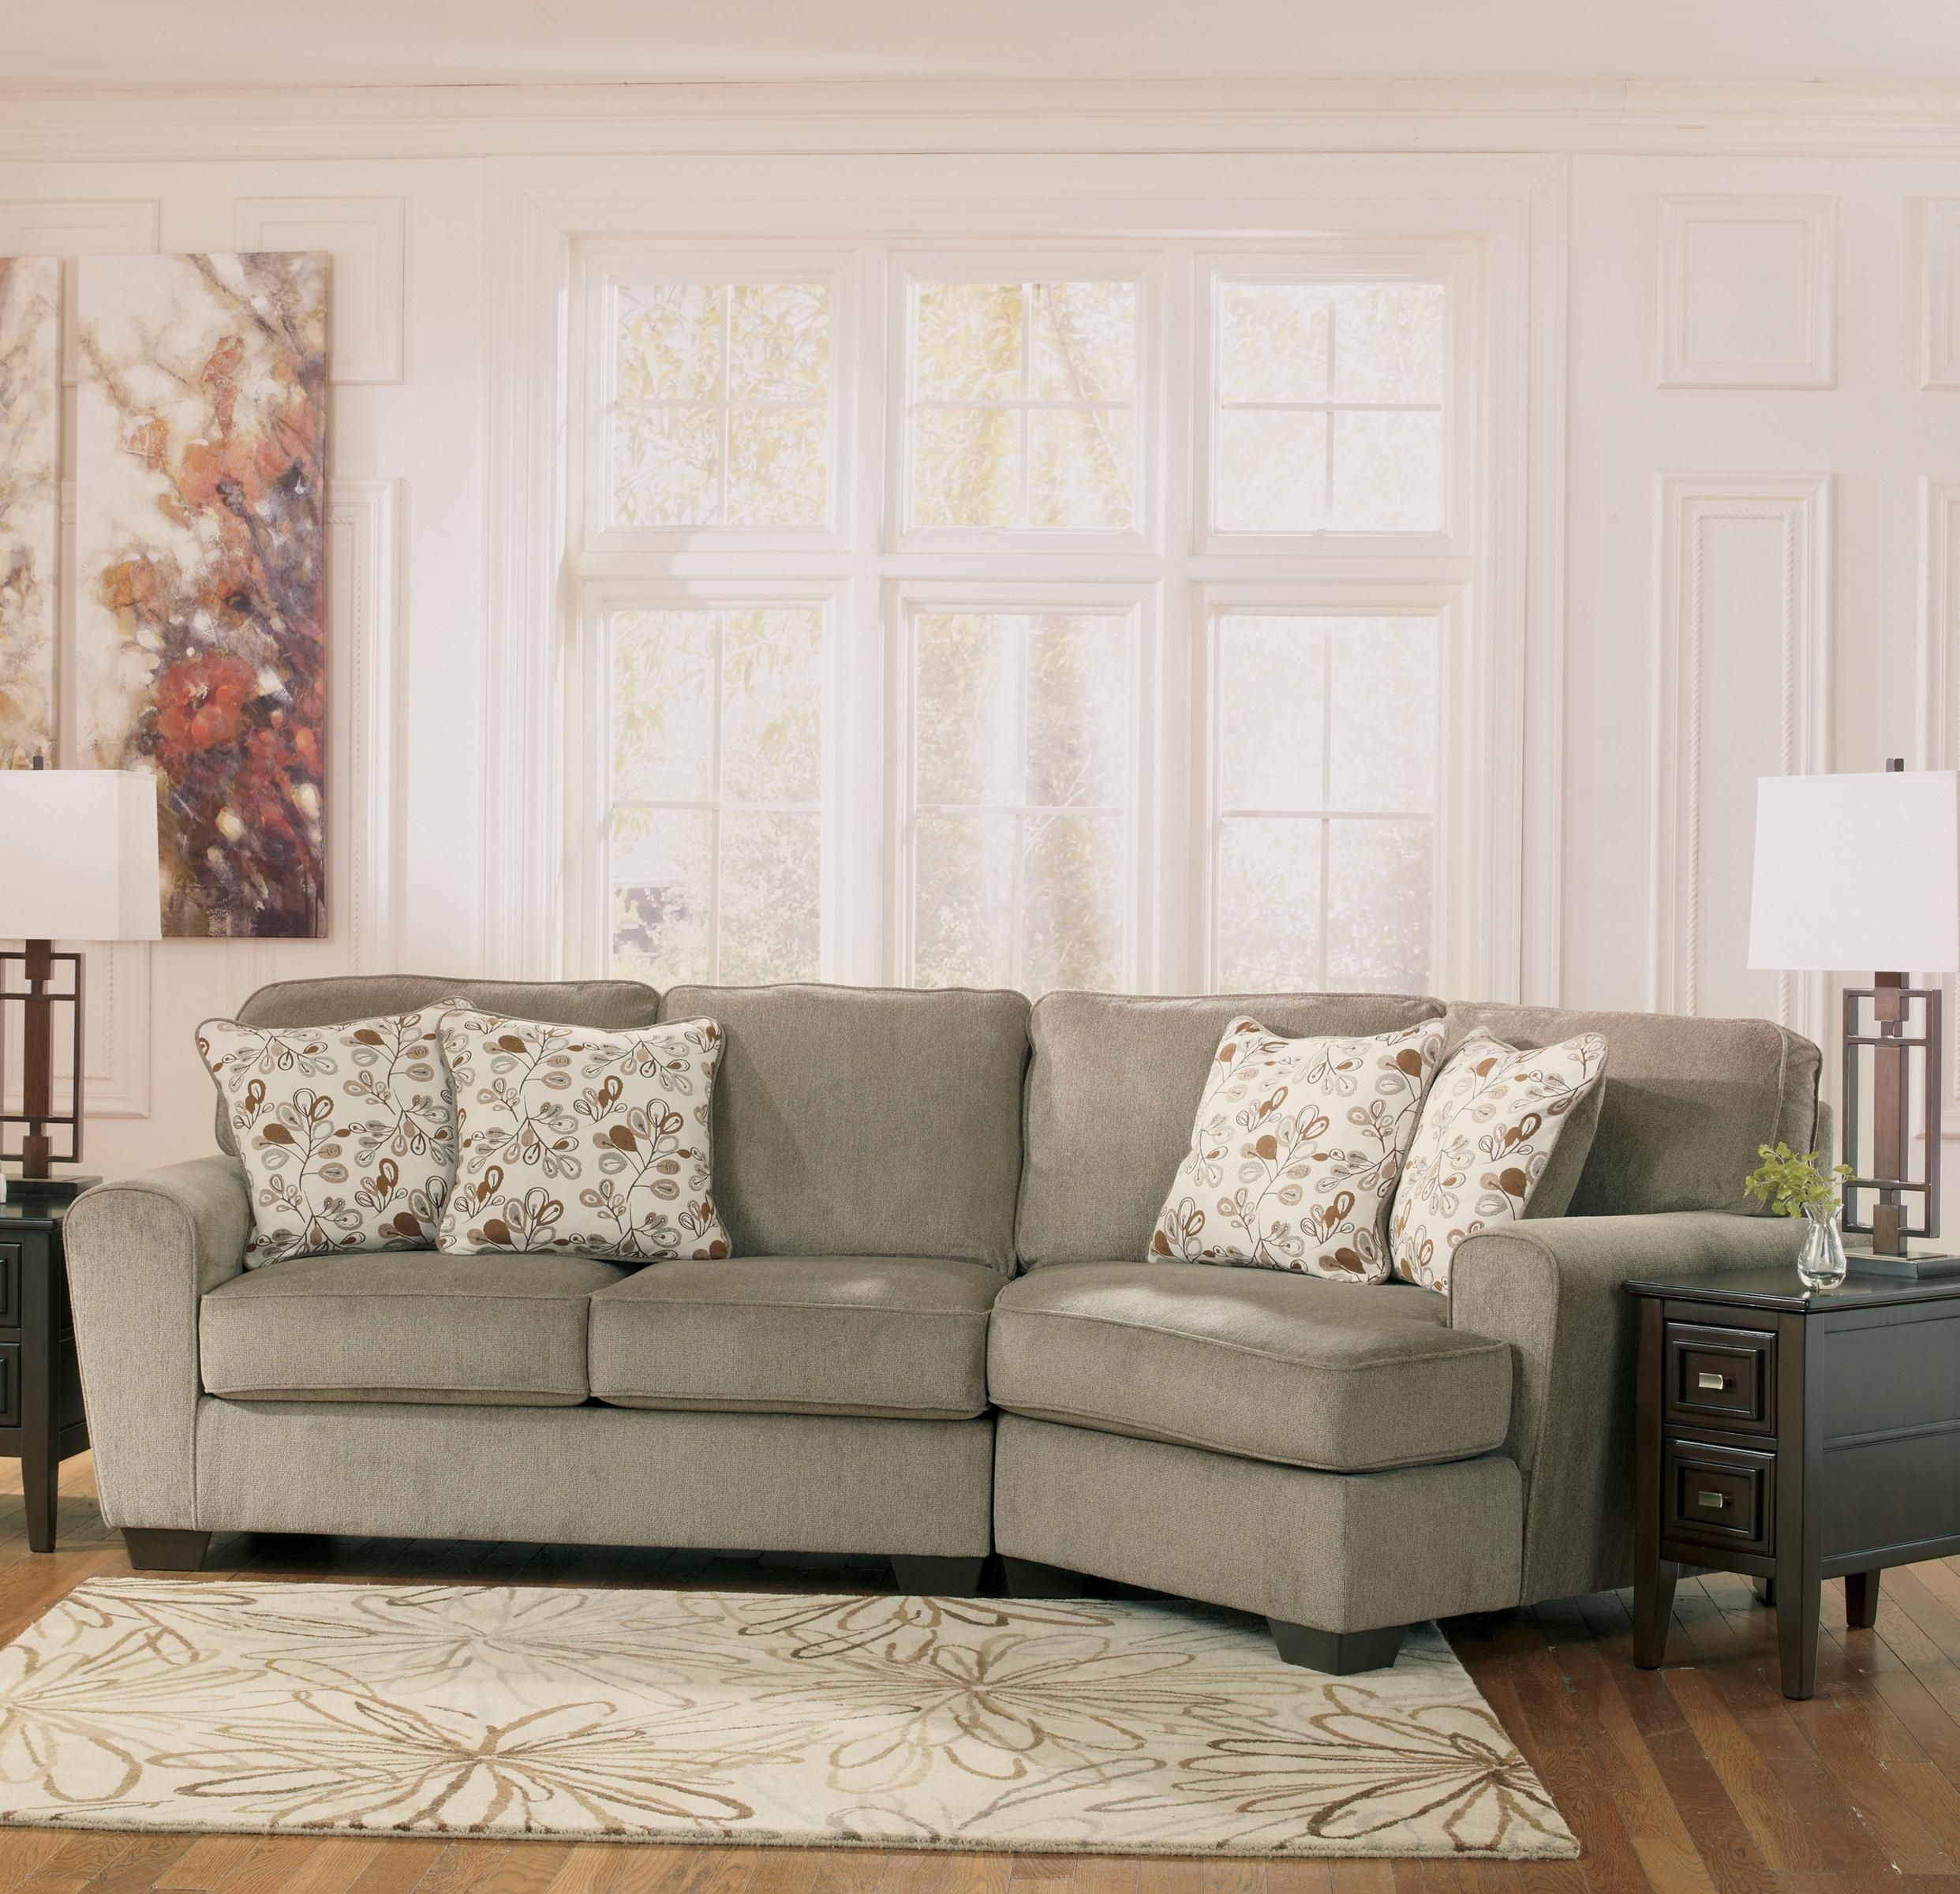 Ashley Furniture Patola Park Patina 2 Piece Sectional With Right For Cuddler Sectional Sofa (View 14 of 15)